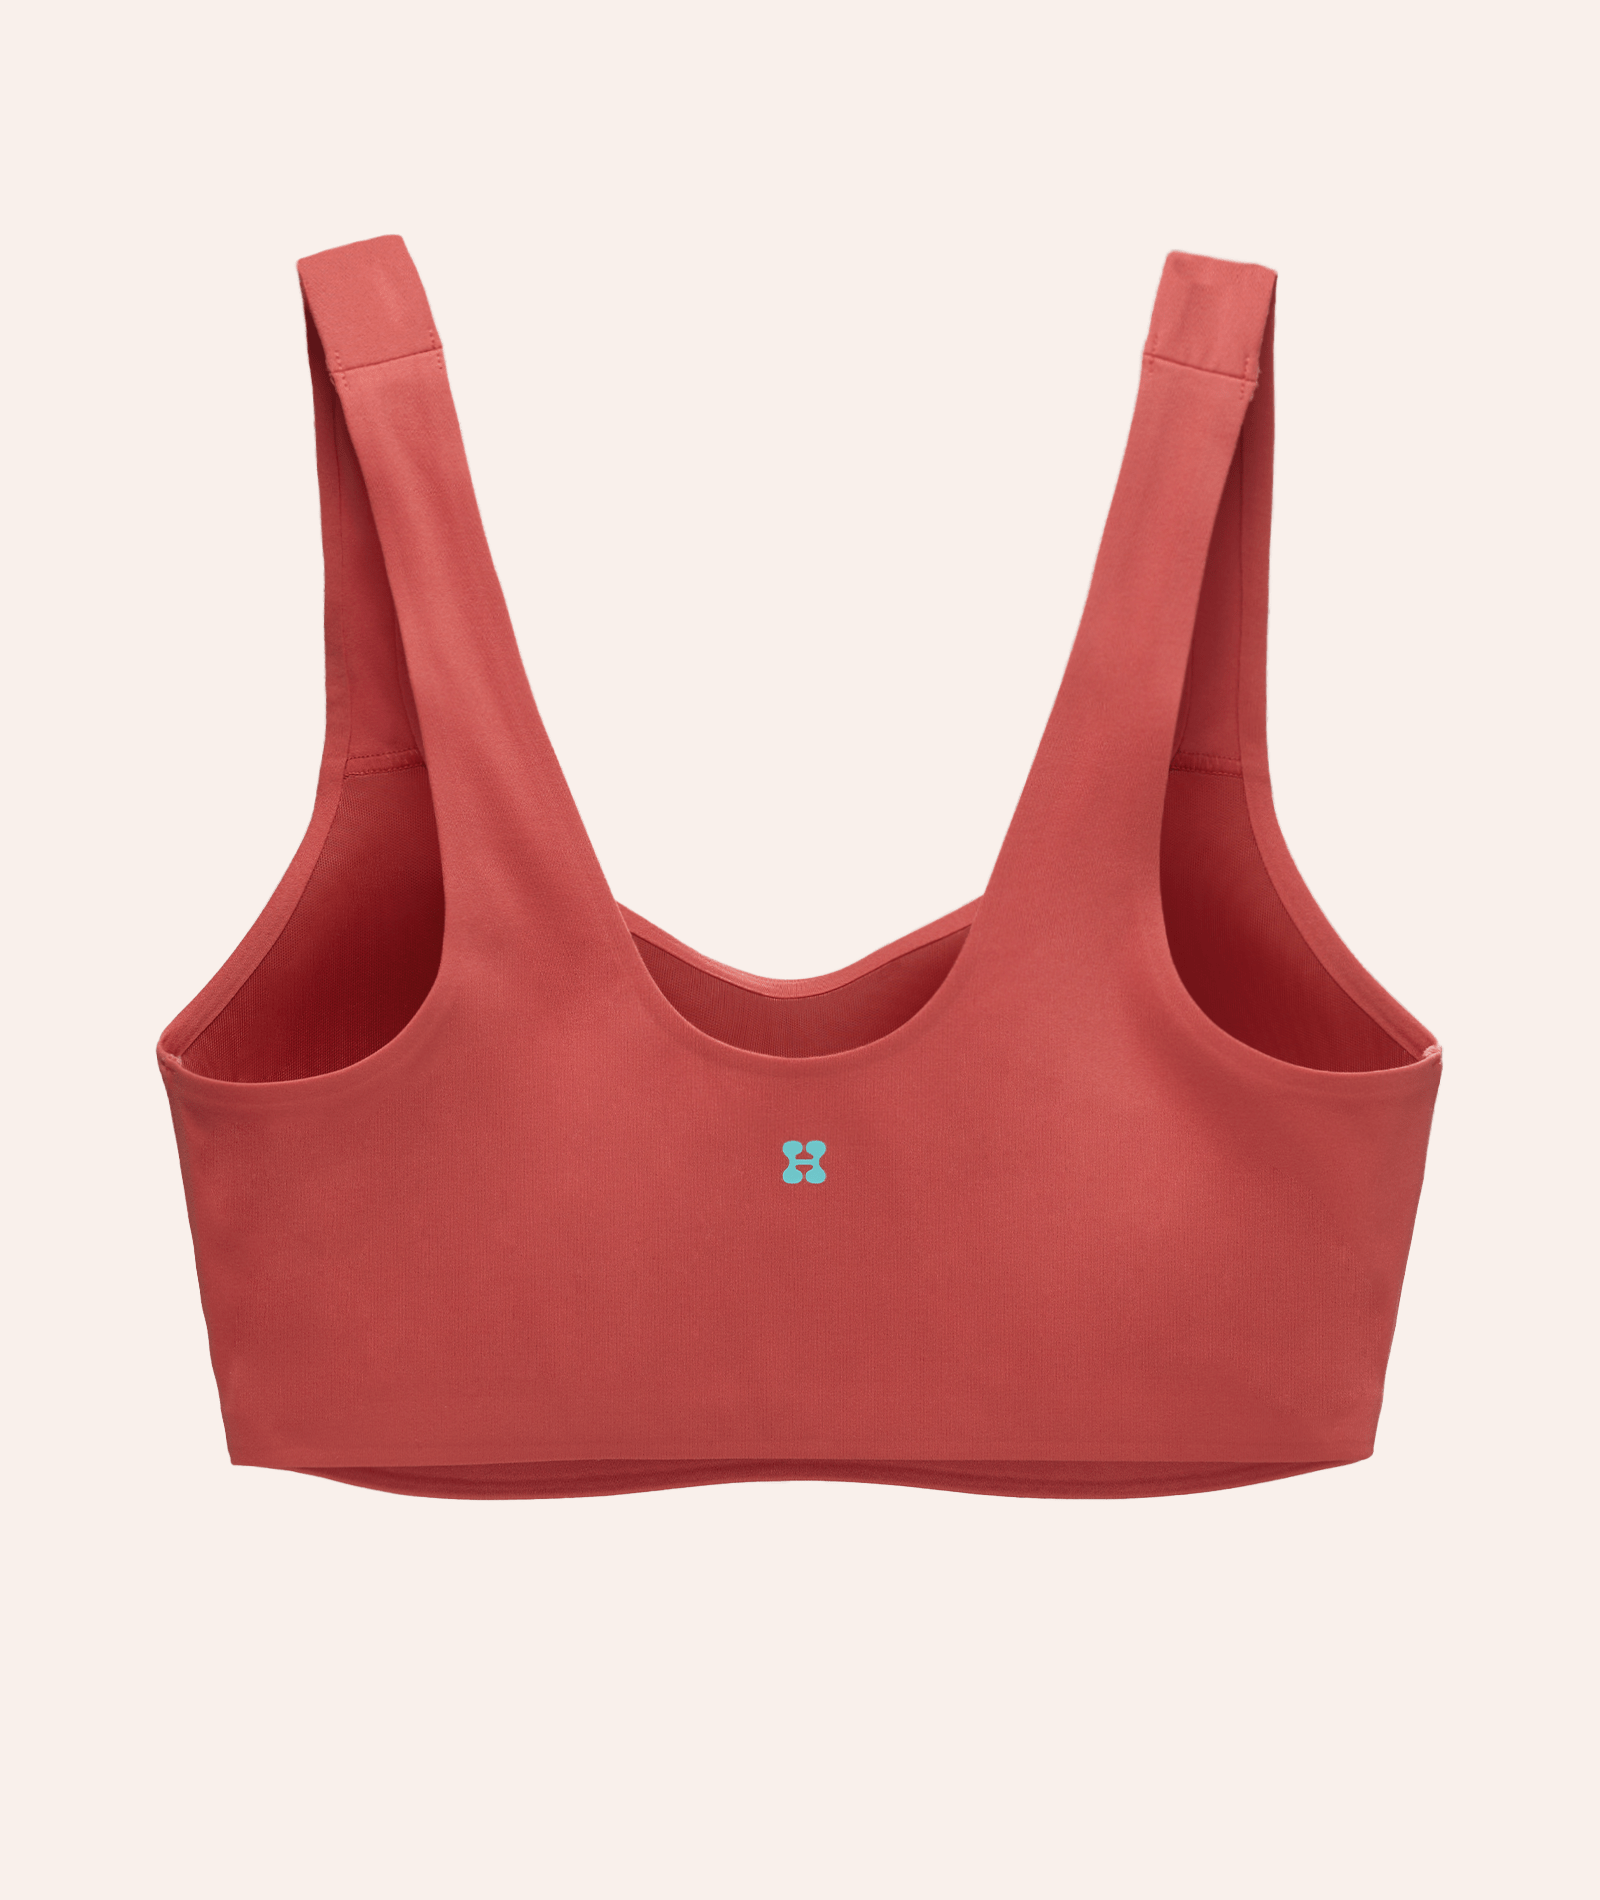 Huug Daily Embrace: Cranberry XL